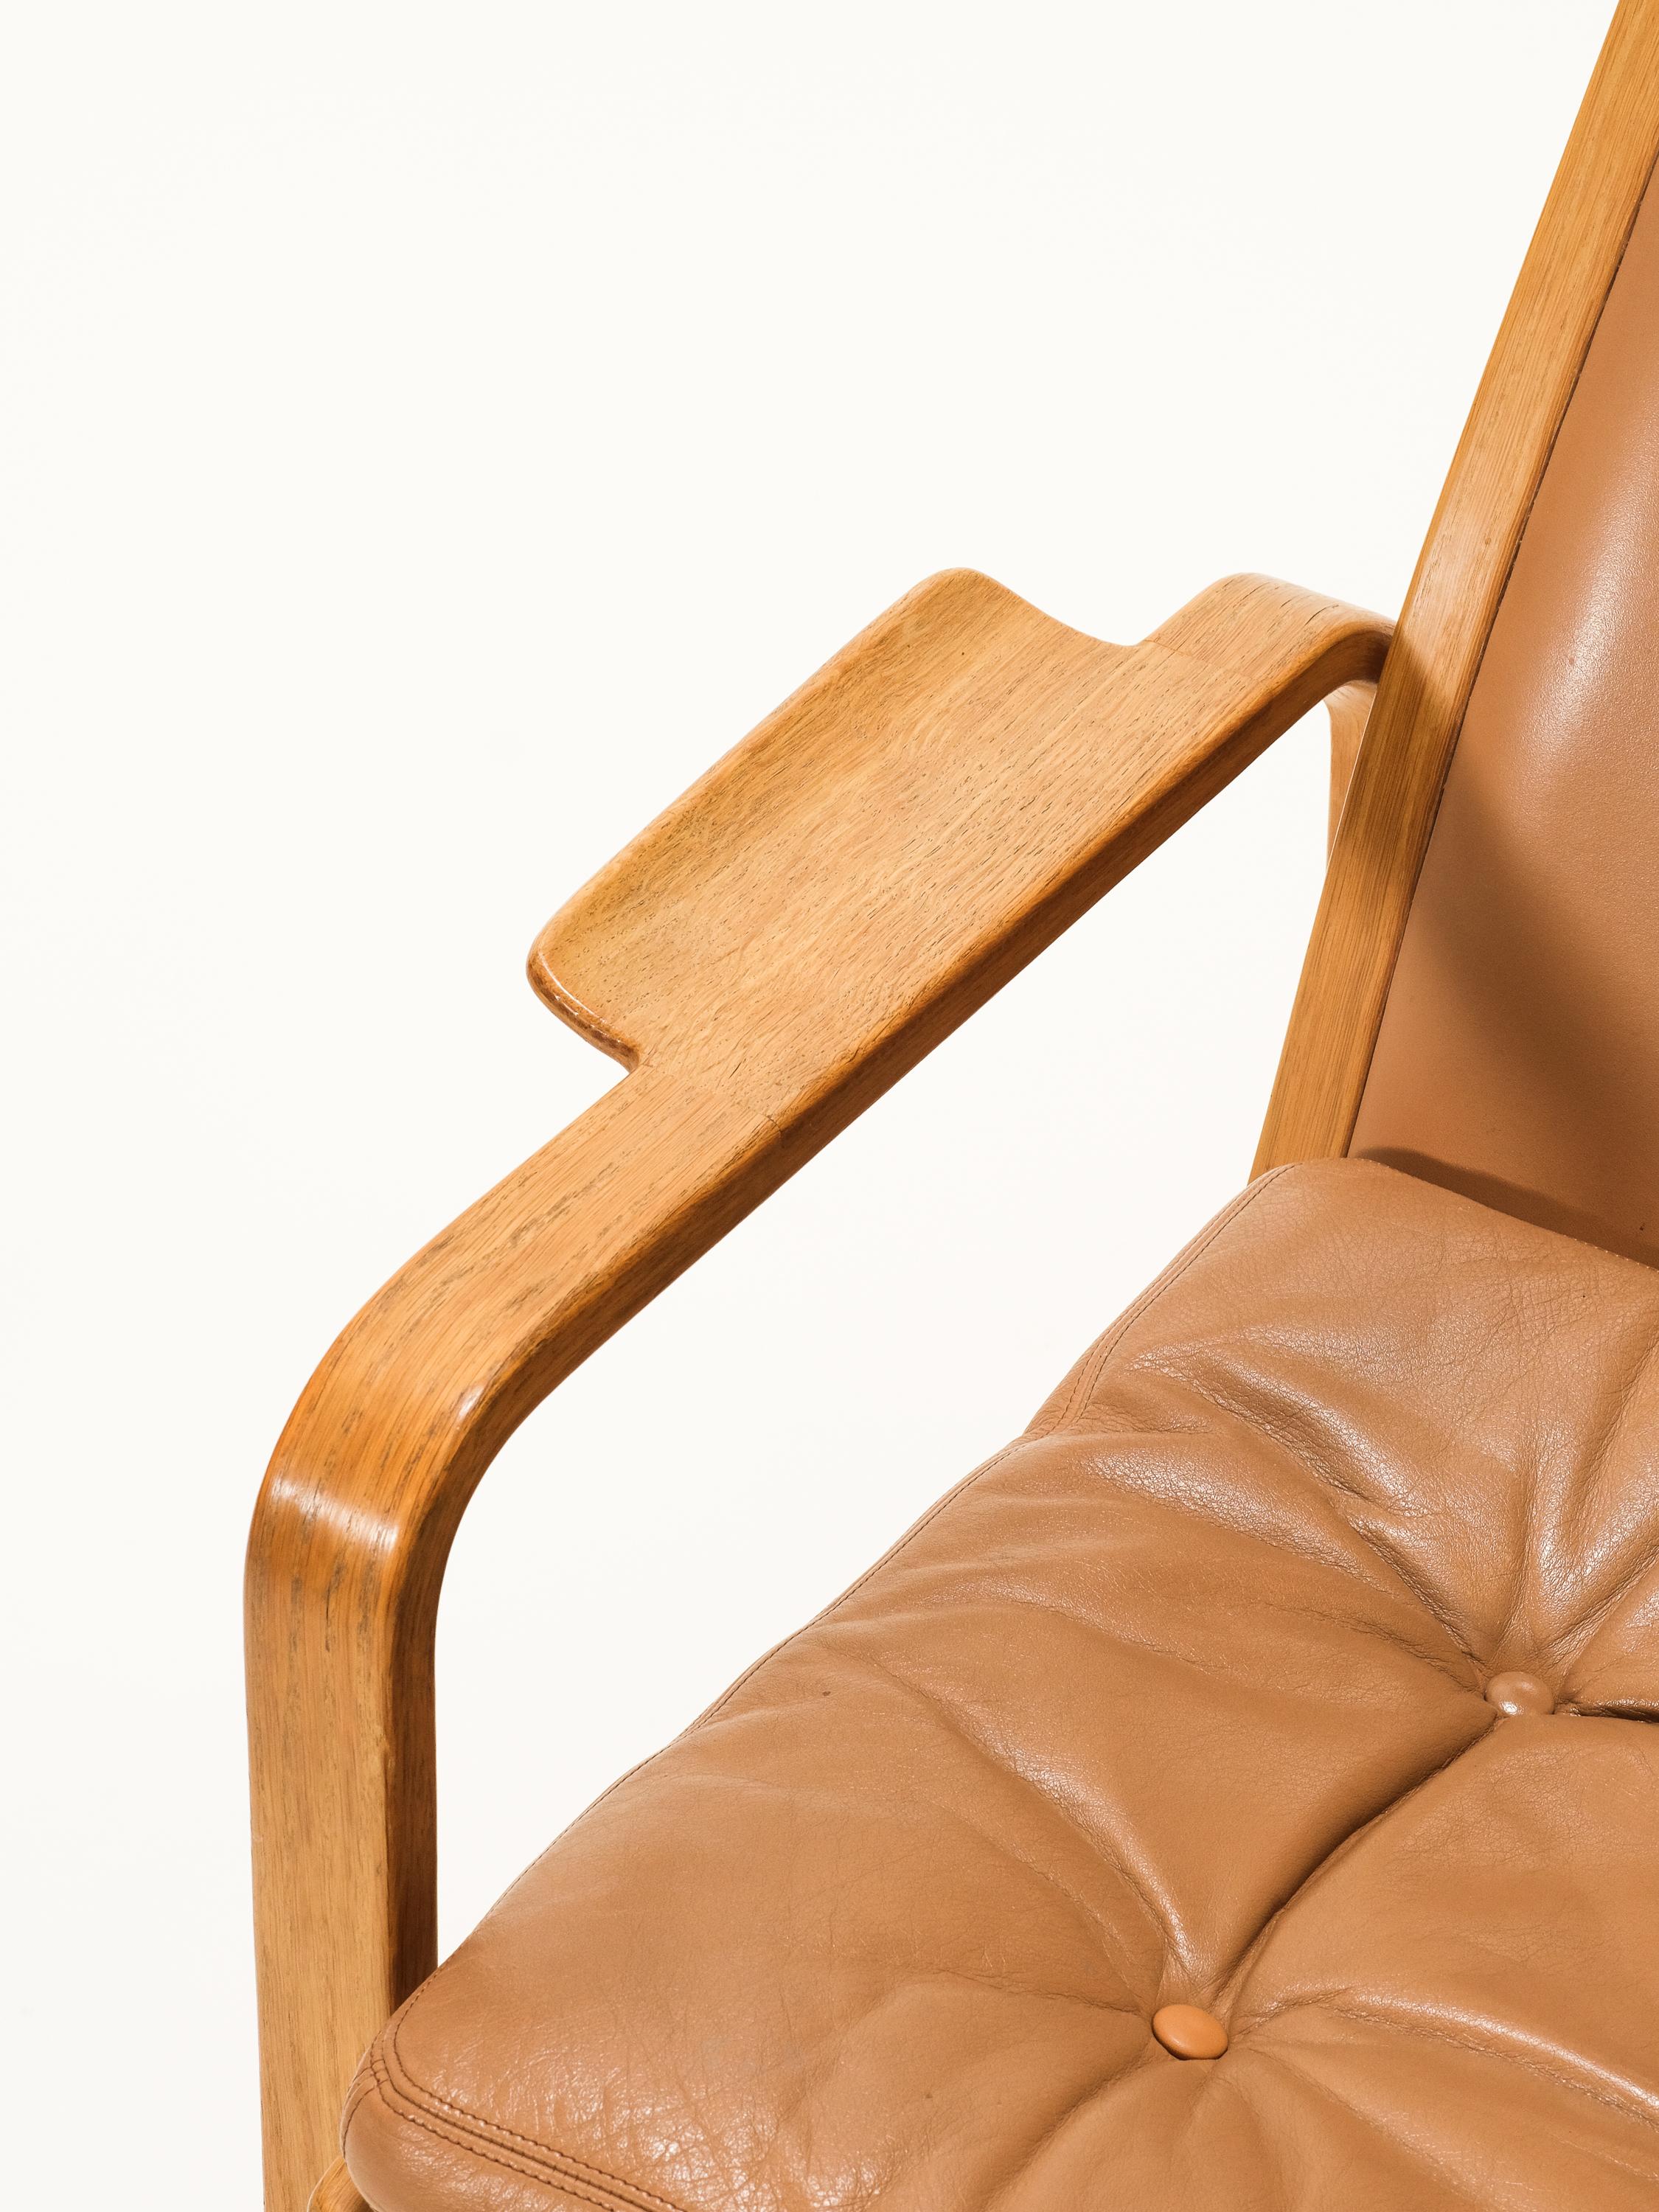 Mid-Century Oak & Leather Lounge Chair by Yngve Ekström for Swedese, 1960s For Sale 3